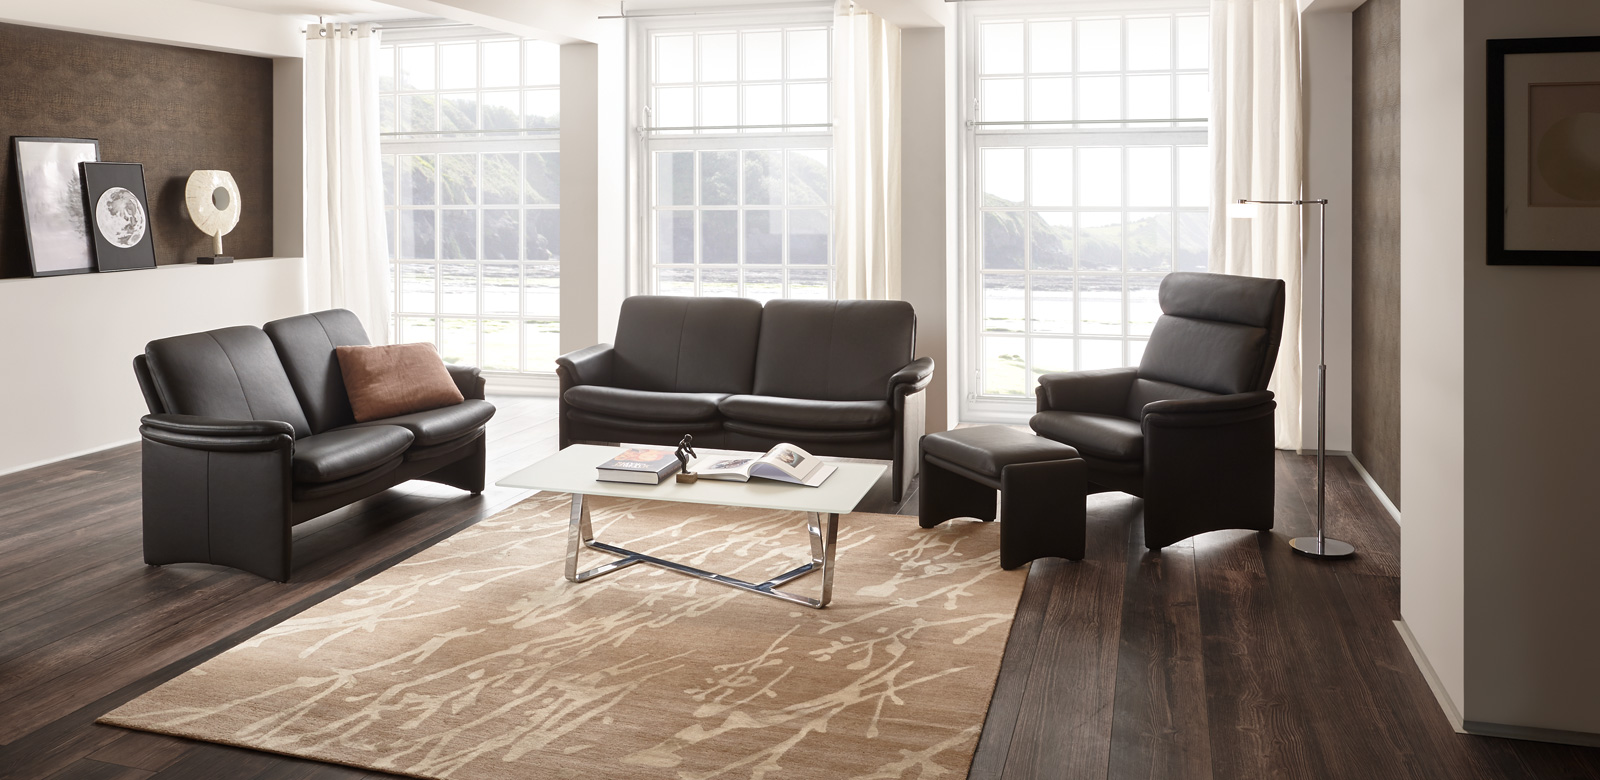 The high-quality City sofa convinces with its filigree details: the slender cheeks, the double lines of the seat, the elegant armrest bent at 90 degrees and the fine centre seam on the backrest and side panel. The armchair on the left has an additional neckrest.